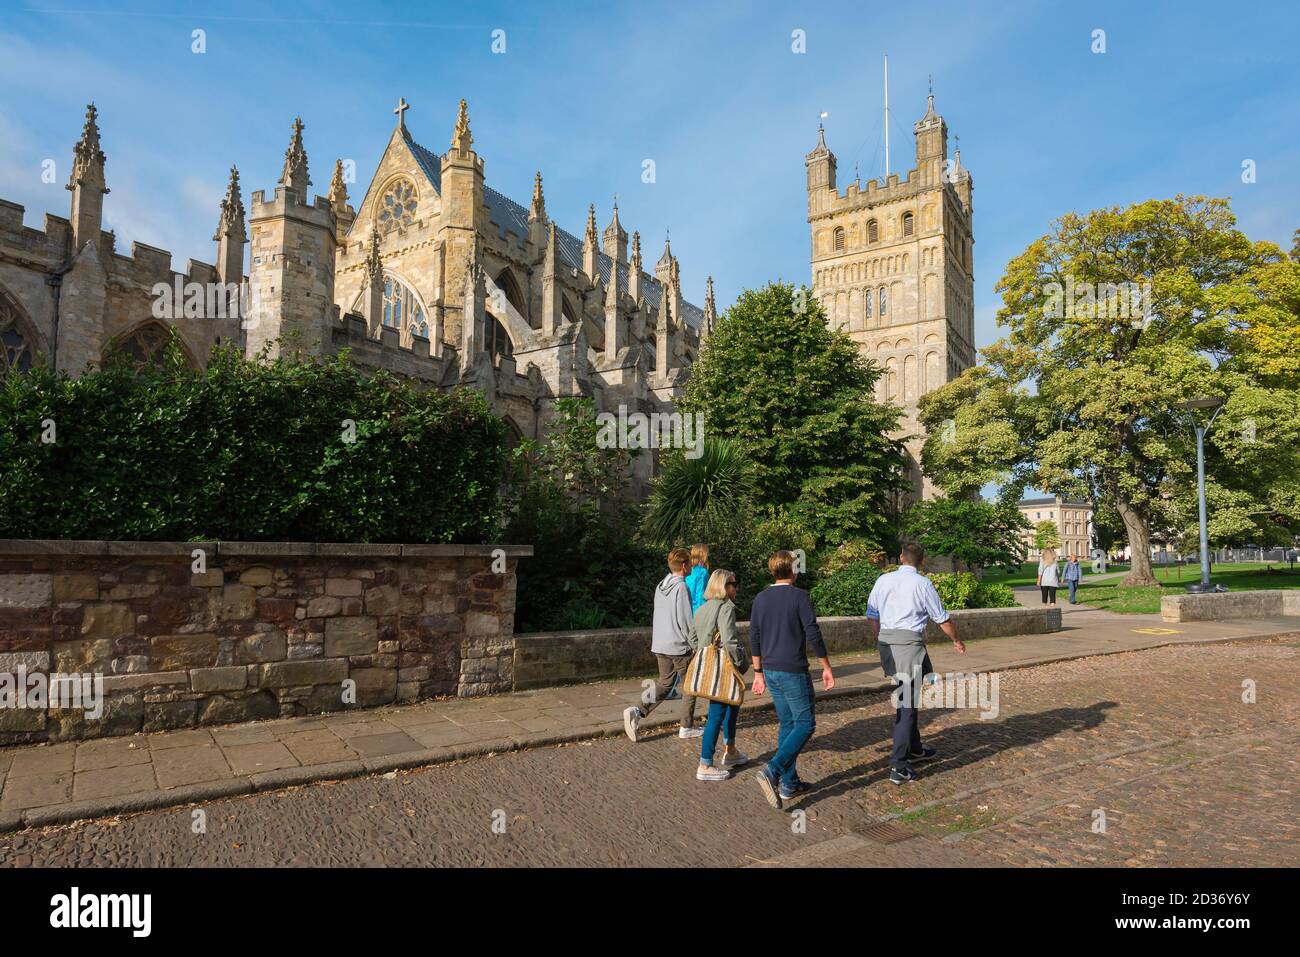 Cathedral Exeter, view in summer of people in the Cathedral Close looking at the north side of the Cathedral of St Peter in Exeter, Devon, England Stock Photo